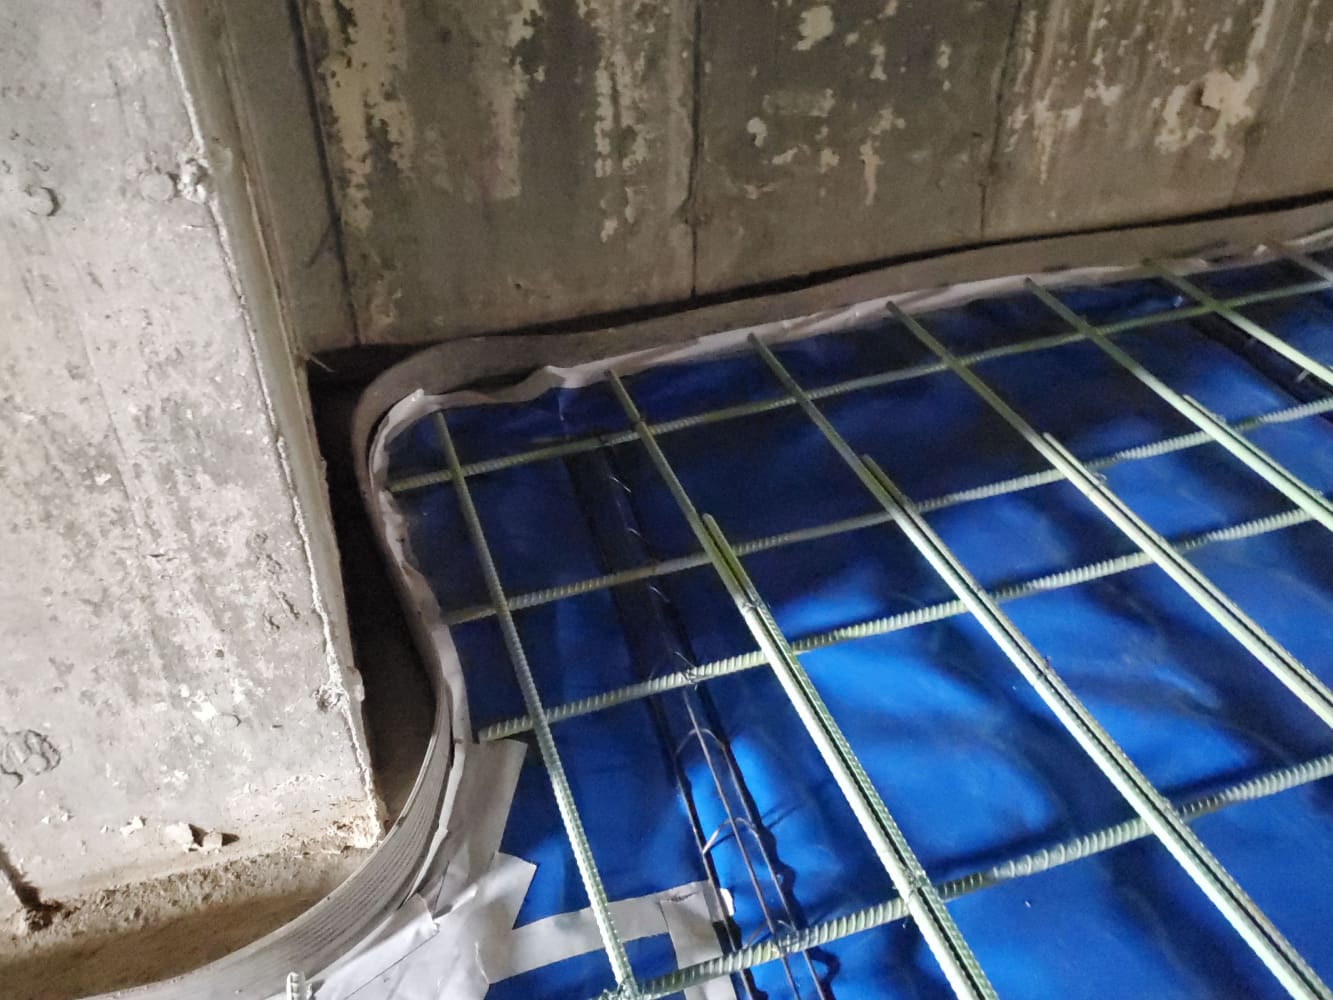 A blue floor with metal bars on it